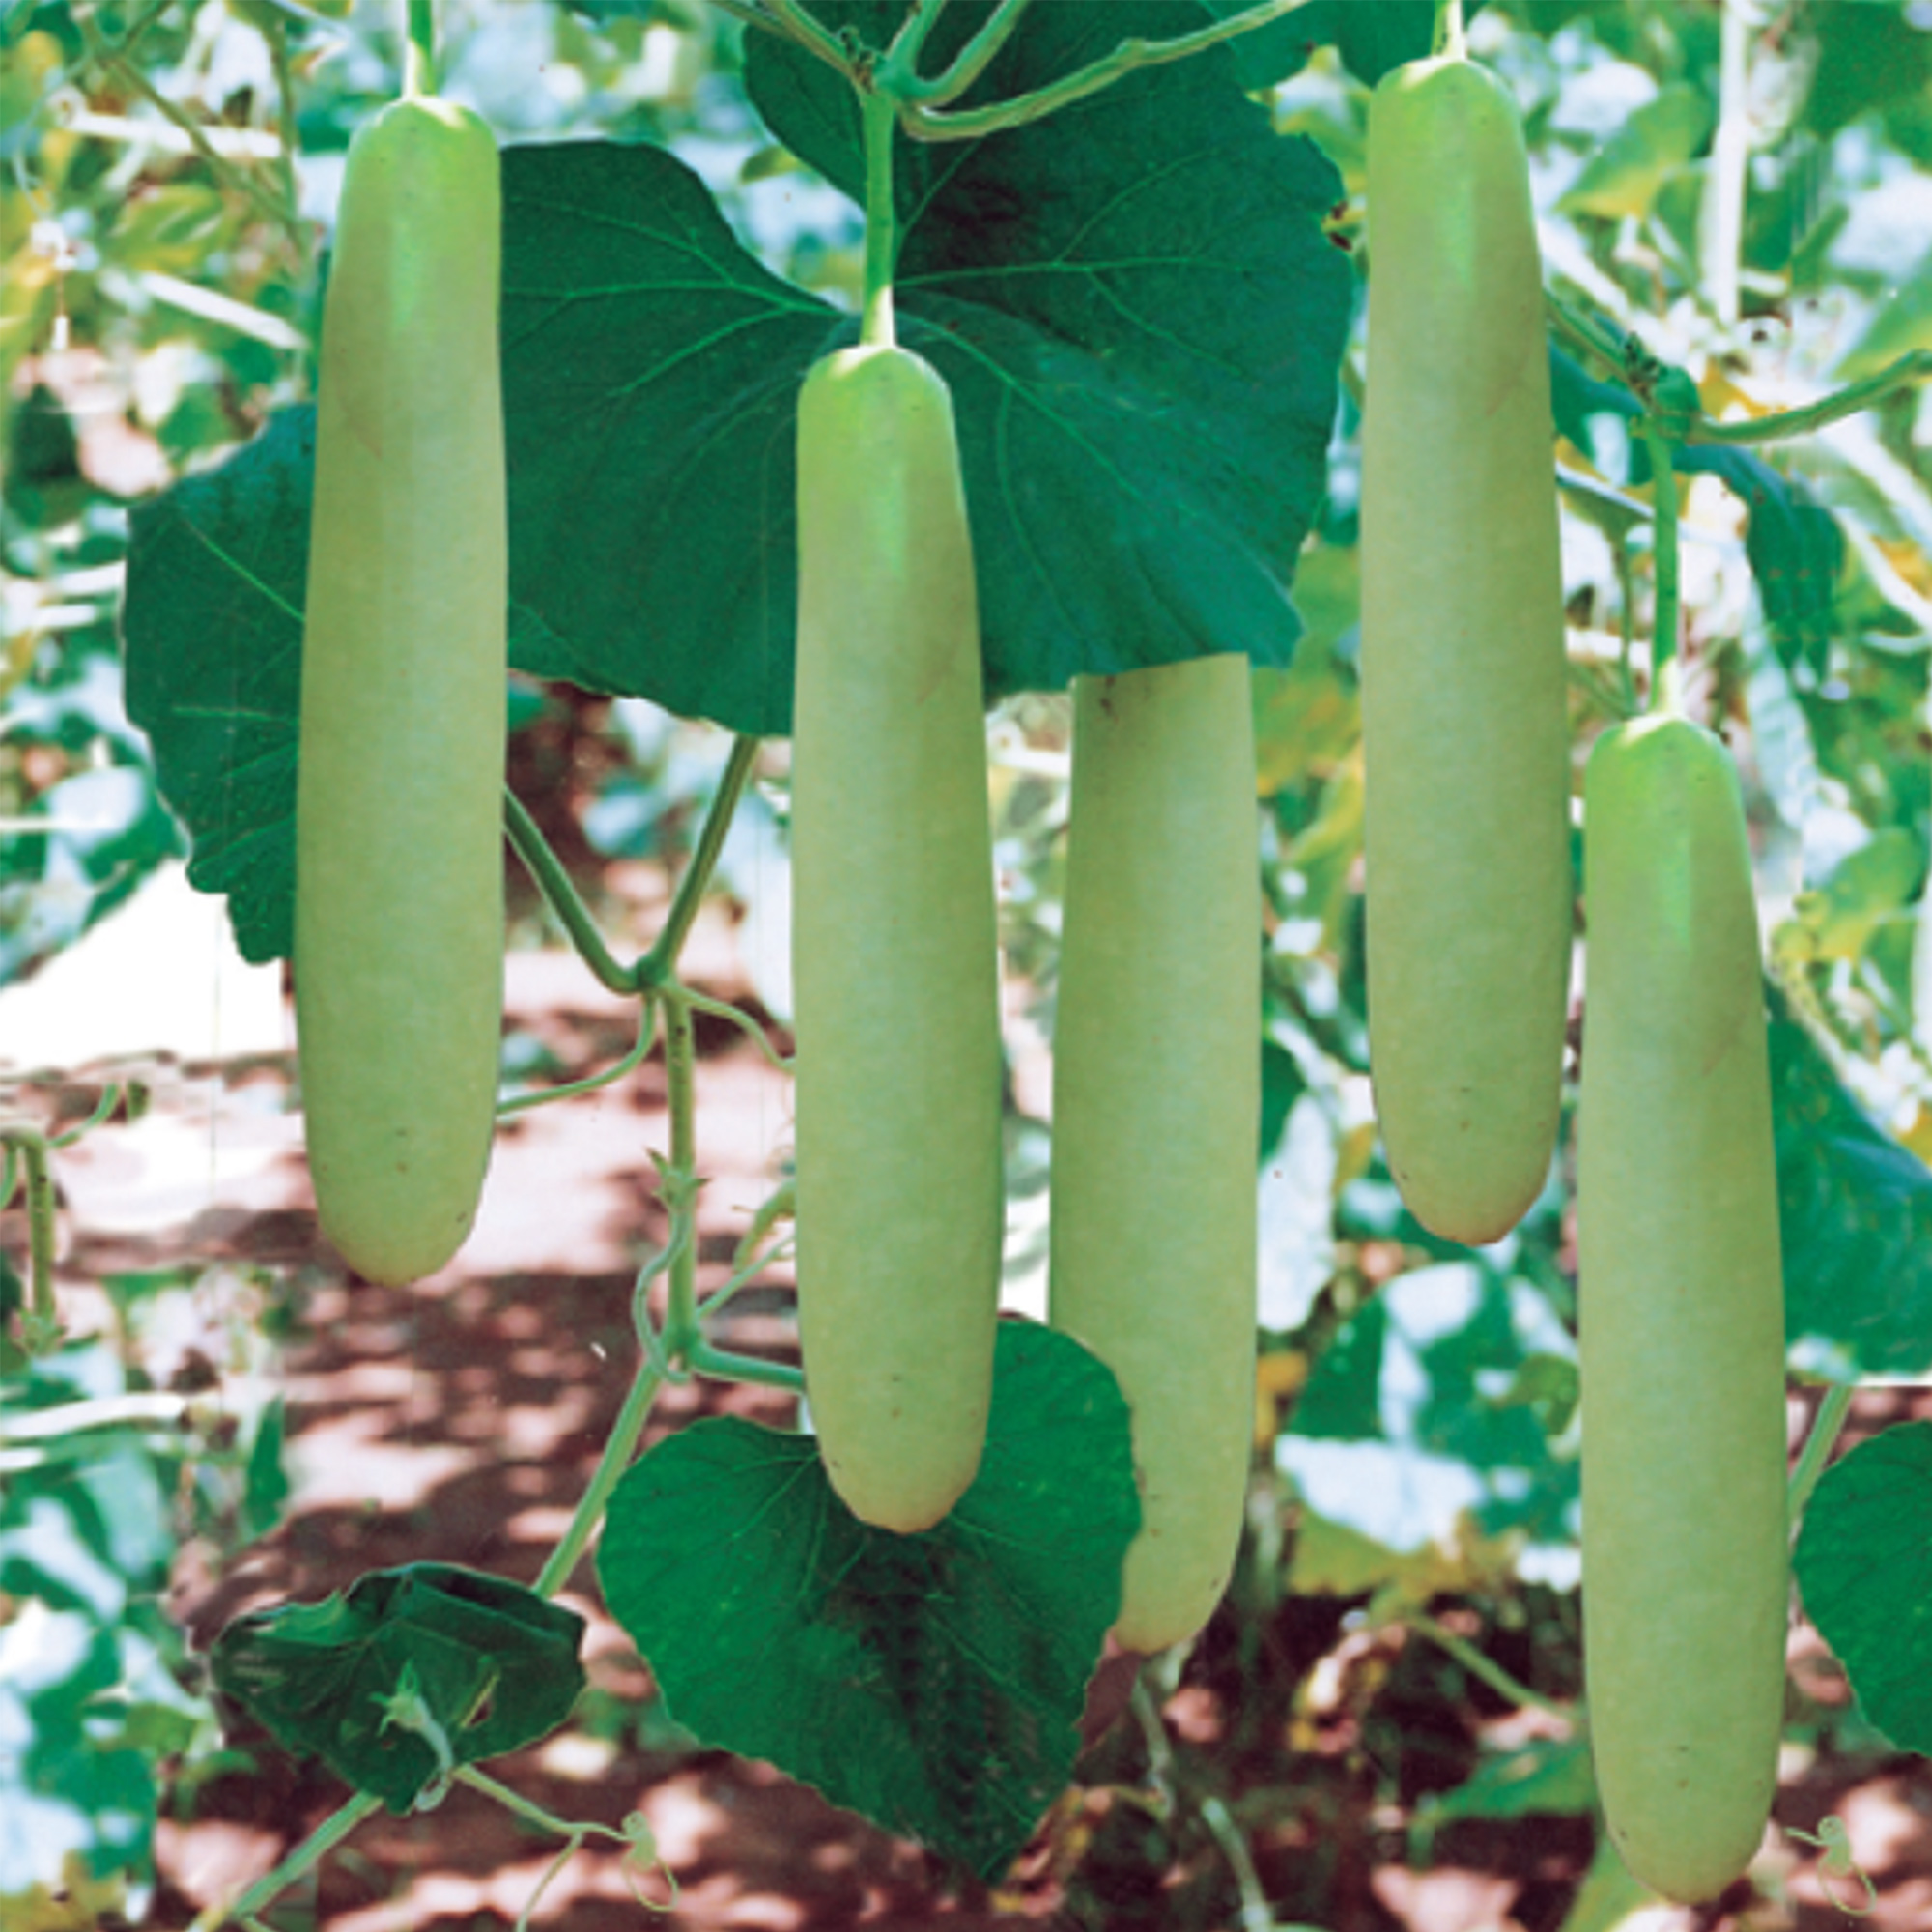 Gourd Seeds - Big Green Sausage - 2 g Packet ~60 Seeds - Lagenaria siceraria - Farm & Garden Vegetable Seeds - Non-GMO, Heirloom, Open Pollinated, Annual - image 1 of 2